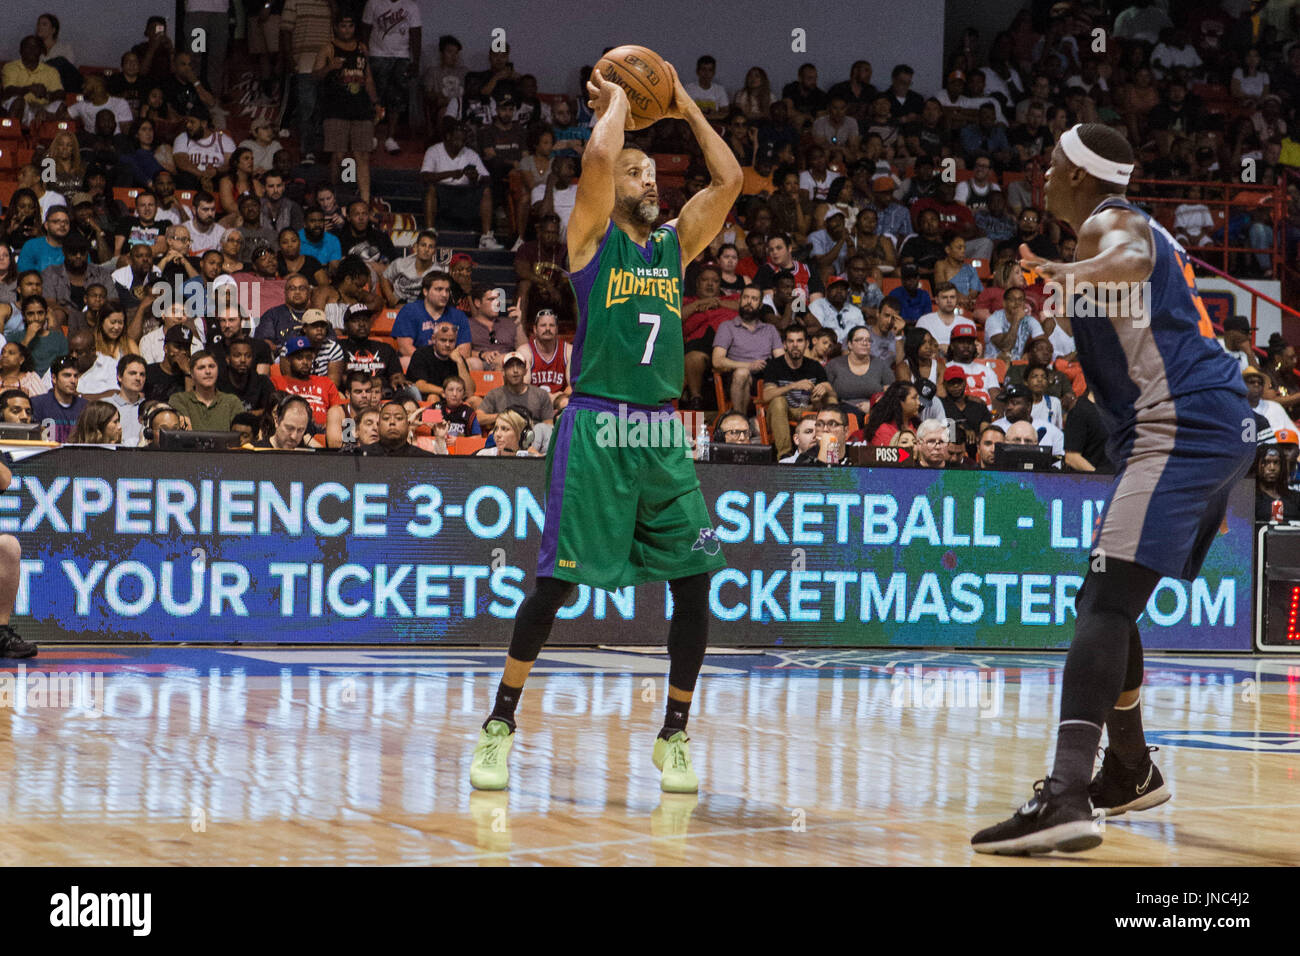 Mahmoud Abdul-Rauf #7 3 Headed Monsters raises ball above his head looking to pass to teammate as Al Thornton #12 3's Company guards him during Game #3 Big3 Week 5 3-on-3 tournament UIC Pavilion July 23,2017 Chicago,Illinois. Stock Photo